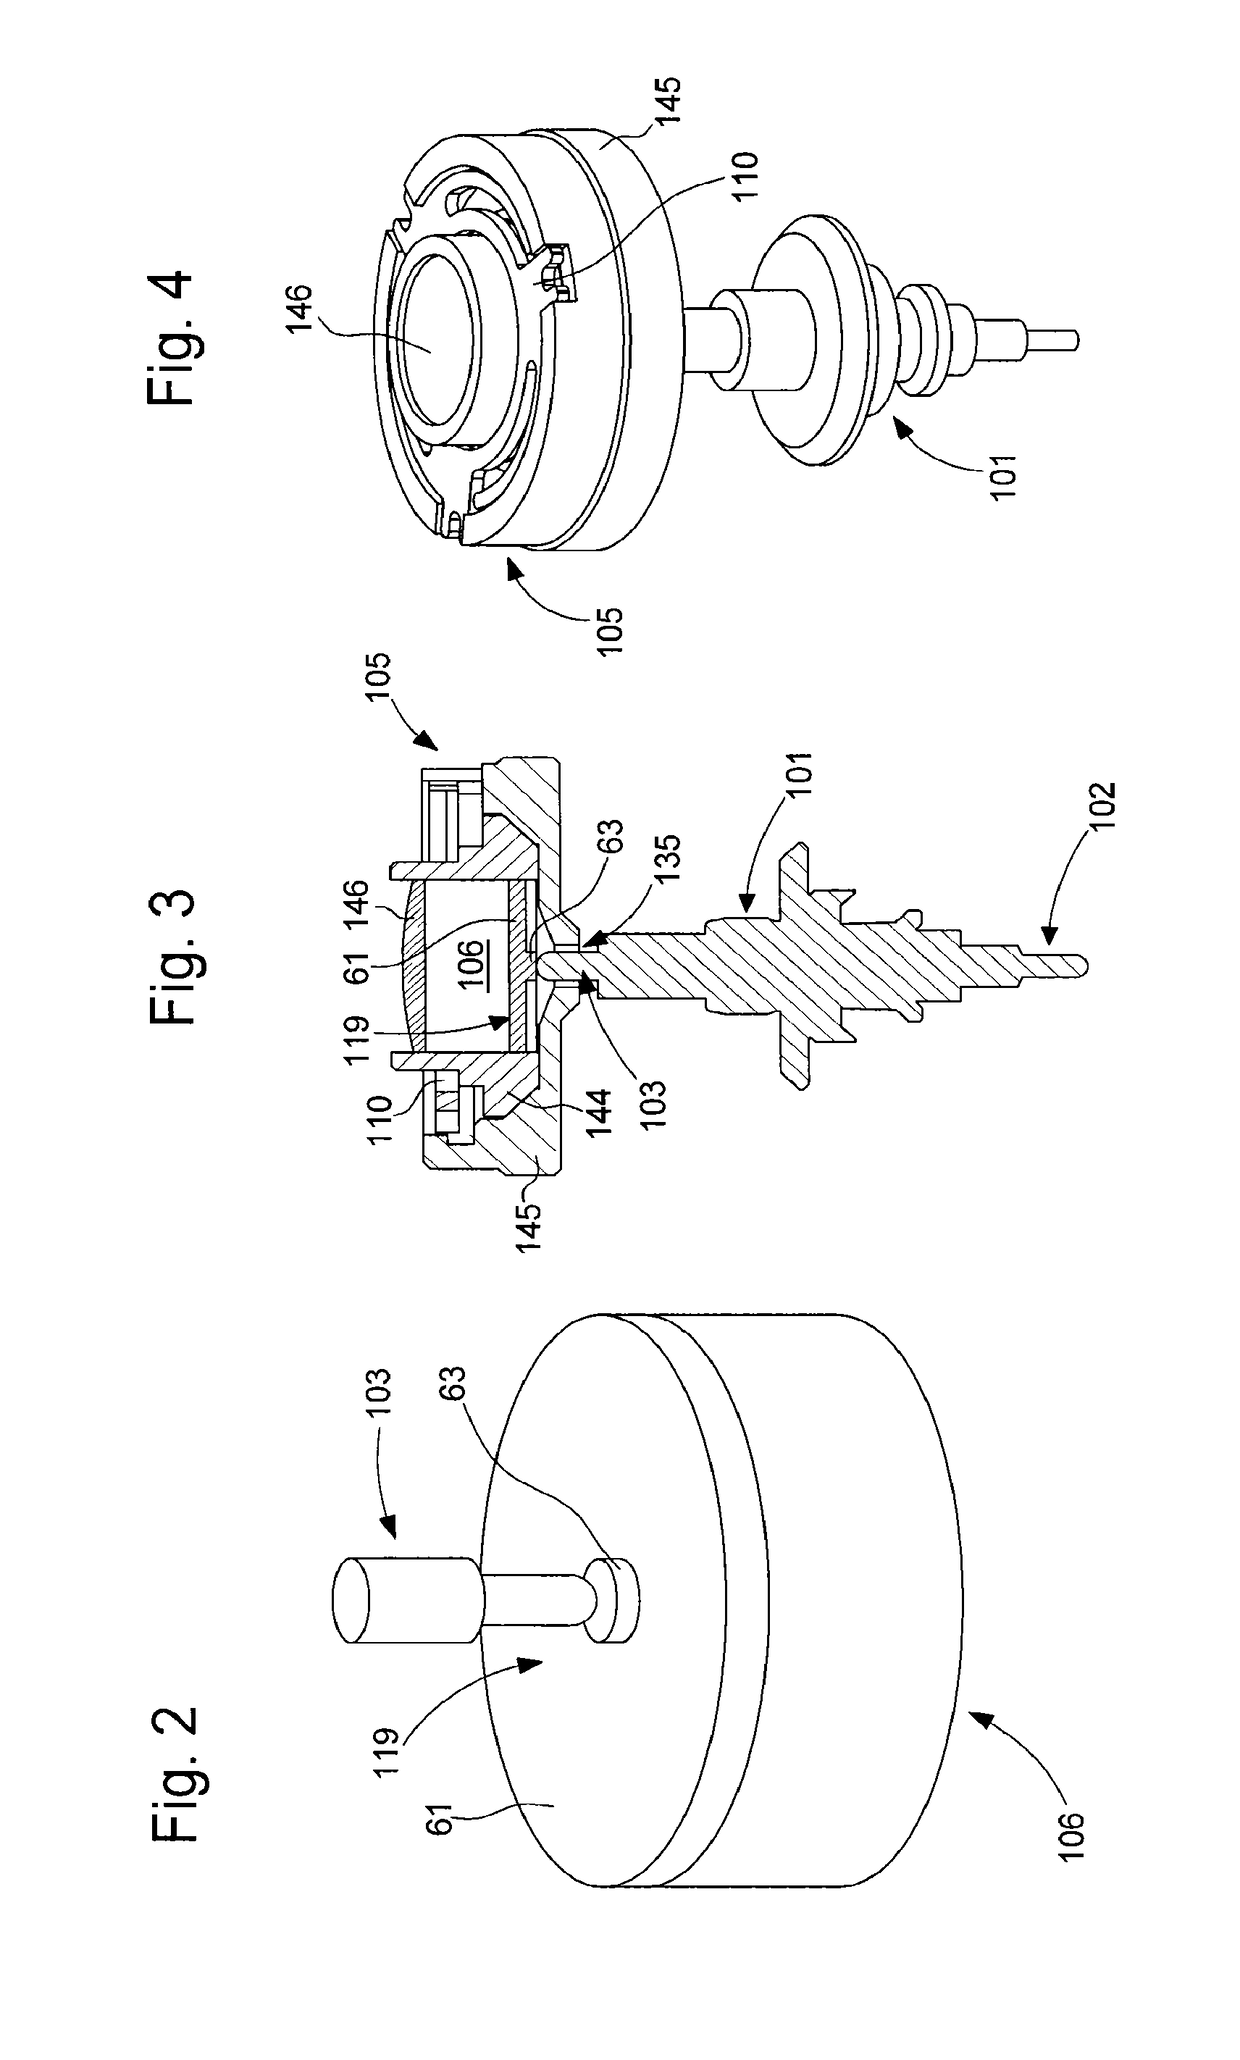 Magnetic device for pivoting an arbor of a rotating member in a timepiece movement